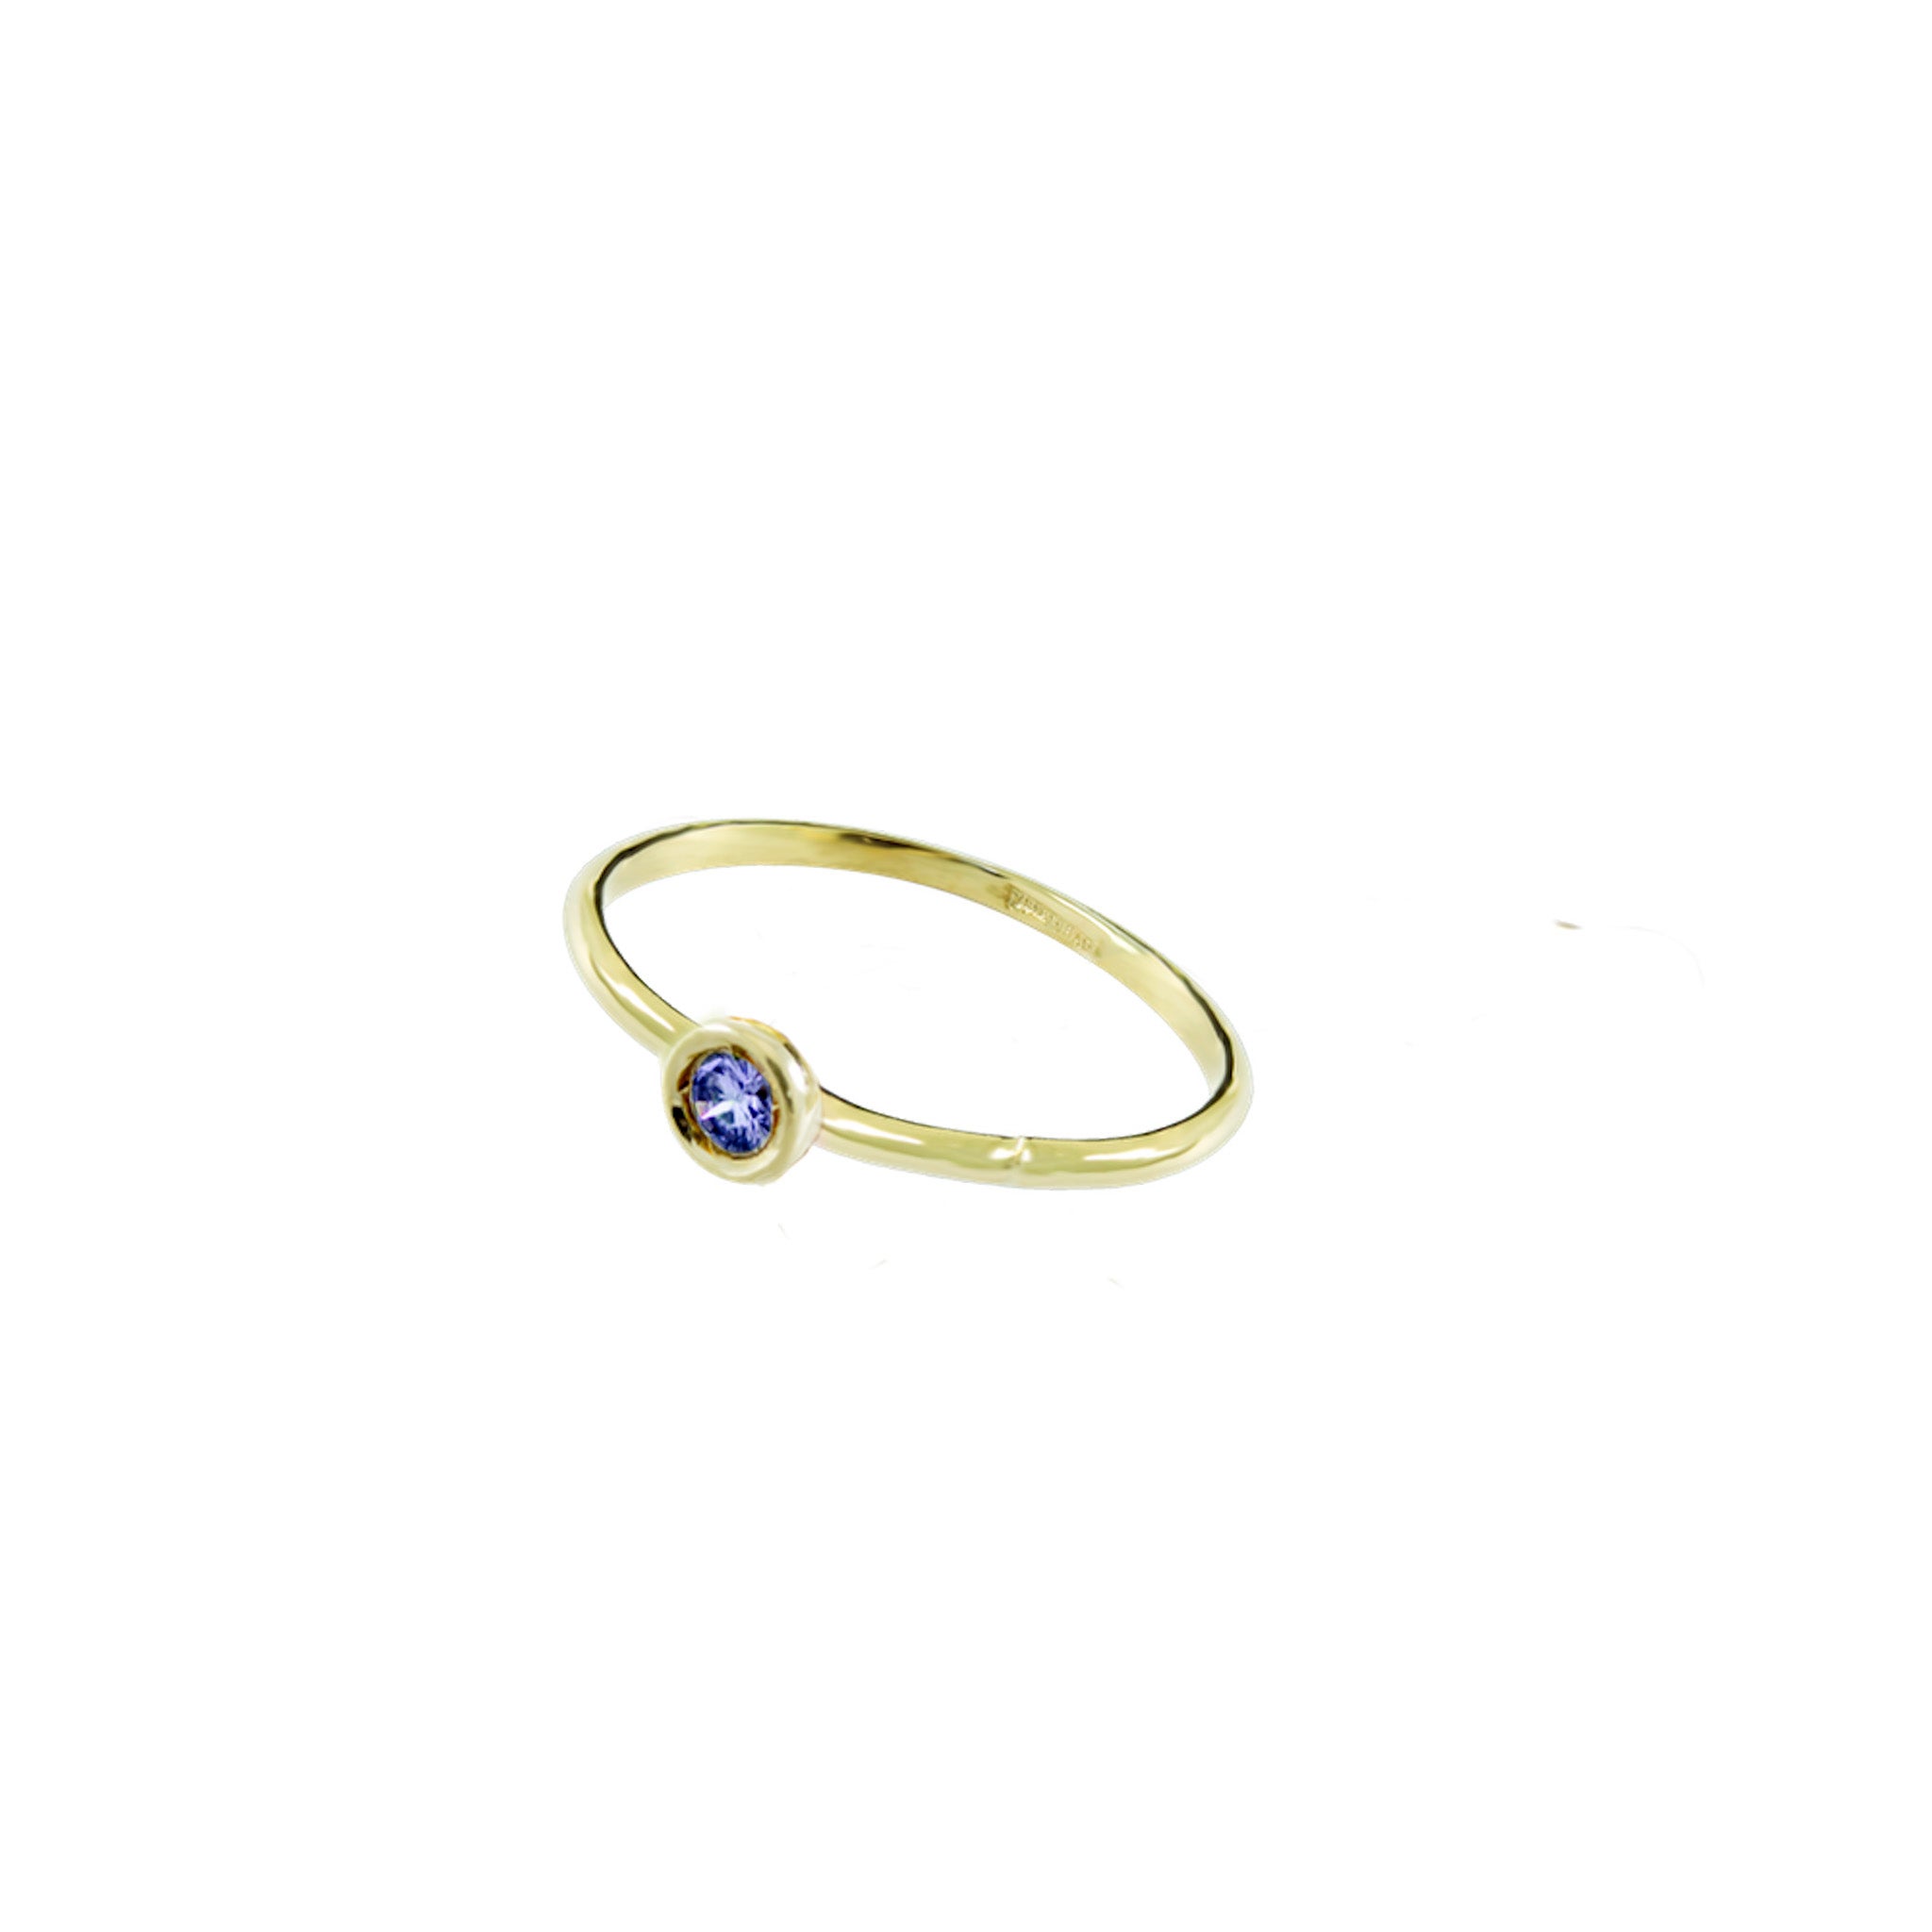 A 0.17ct Brilliant cut Topaz has been hand set in a 18kt Yellow Gold bezel setting to create this pretty ring. It can be worn on its own or combined with others to create a chic stacking set.
Please scroll to see this ring set with other stones such